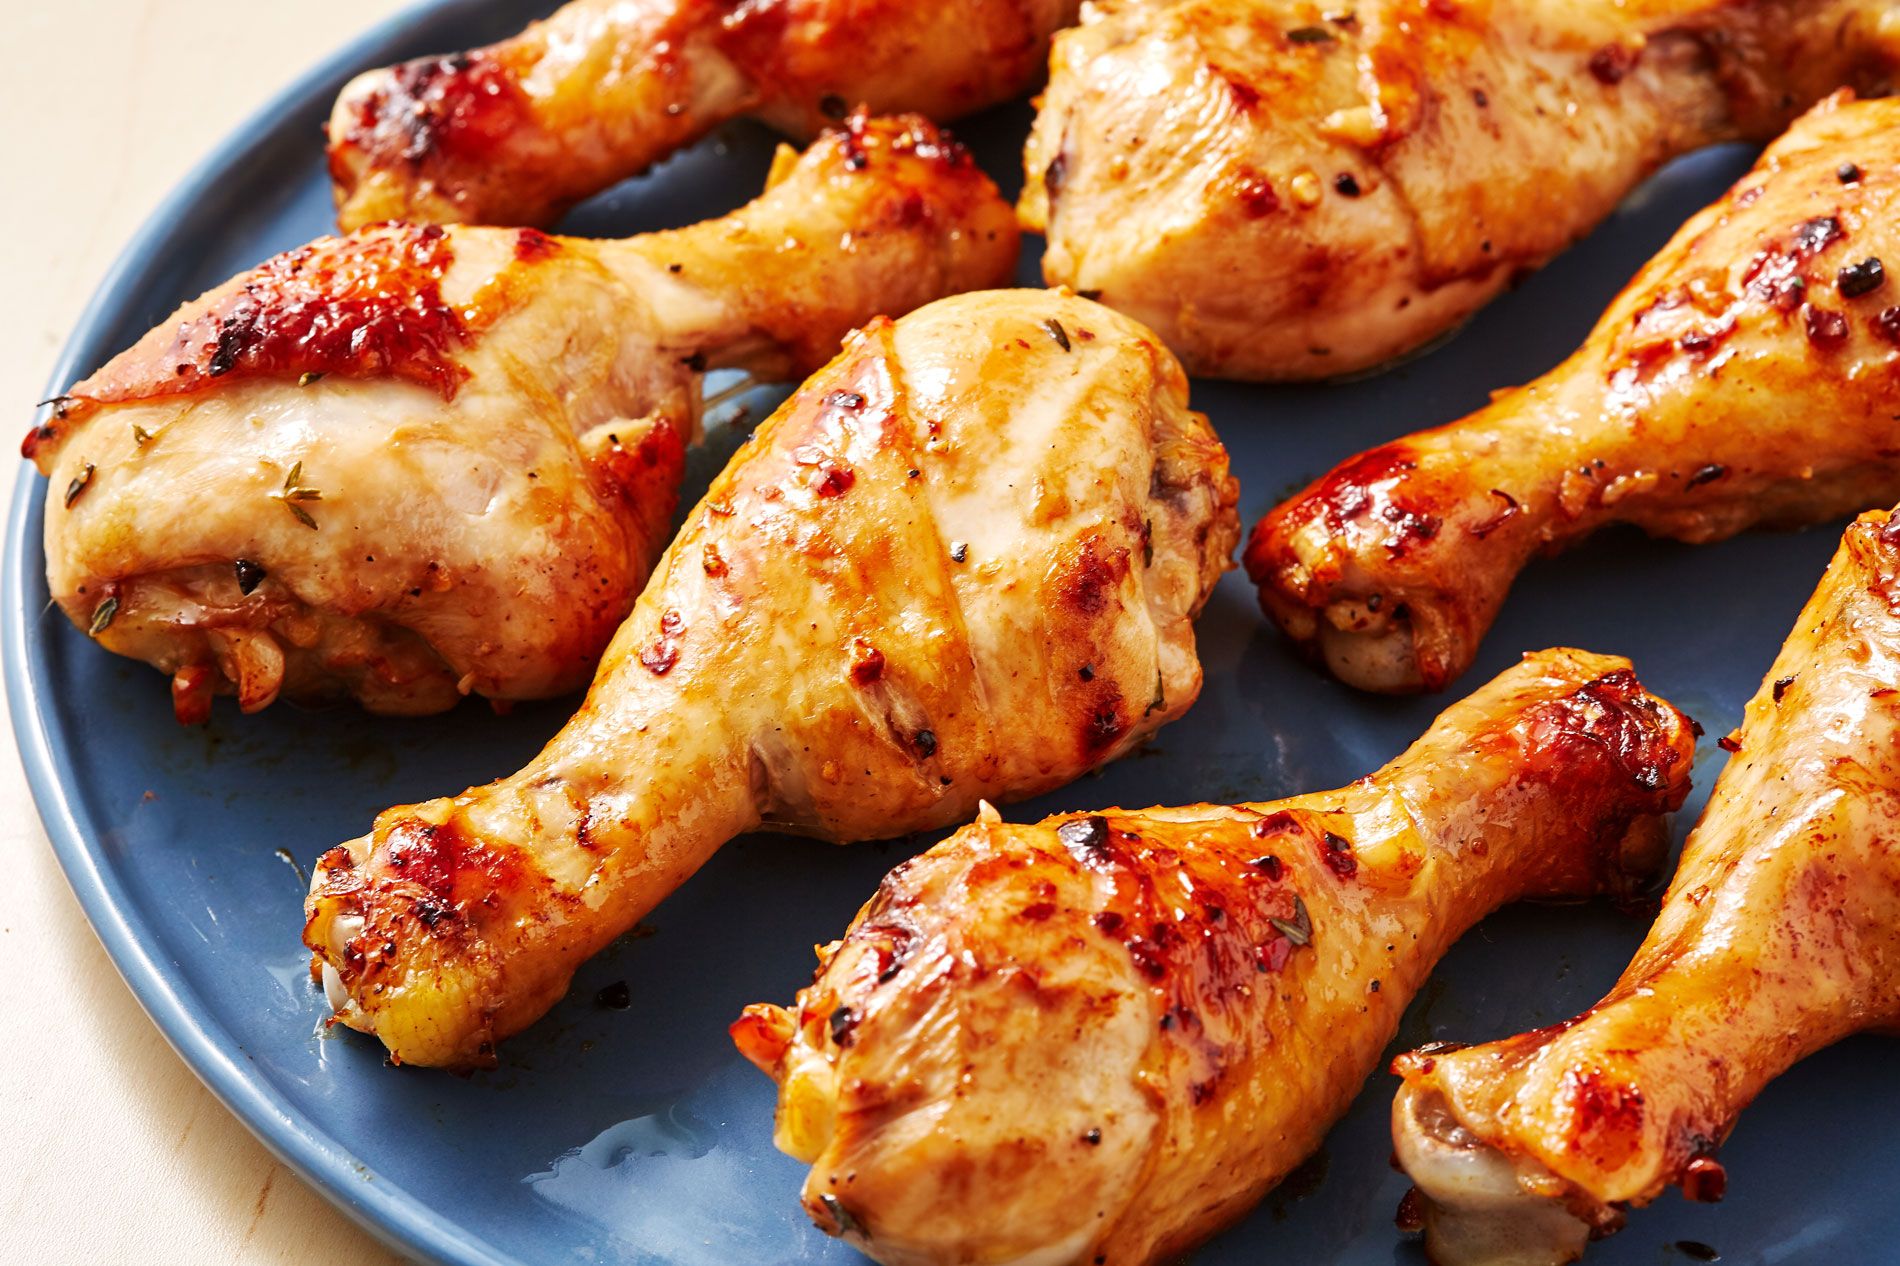 Easy Baked Chicken Drumsticks Recipe - How to Cook Drumsticks In The Oven